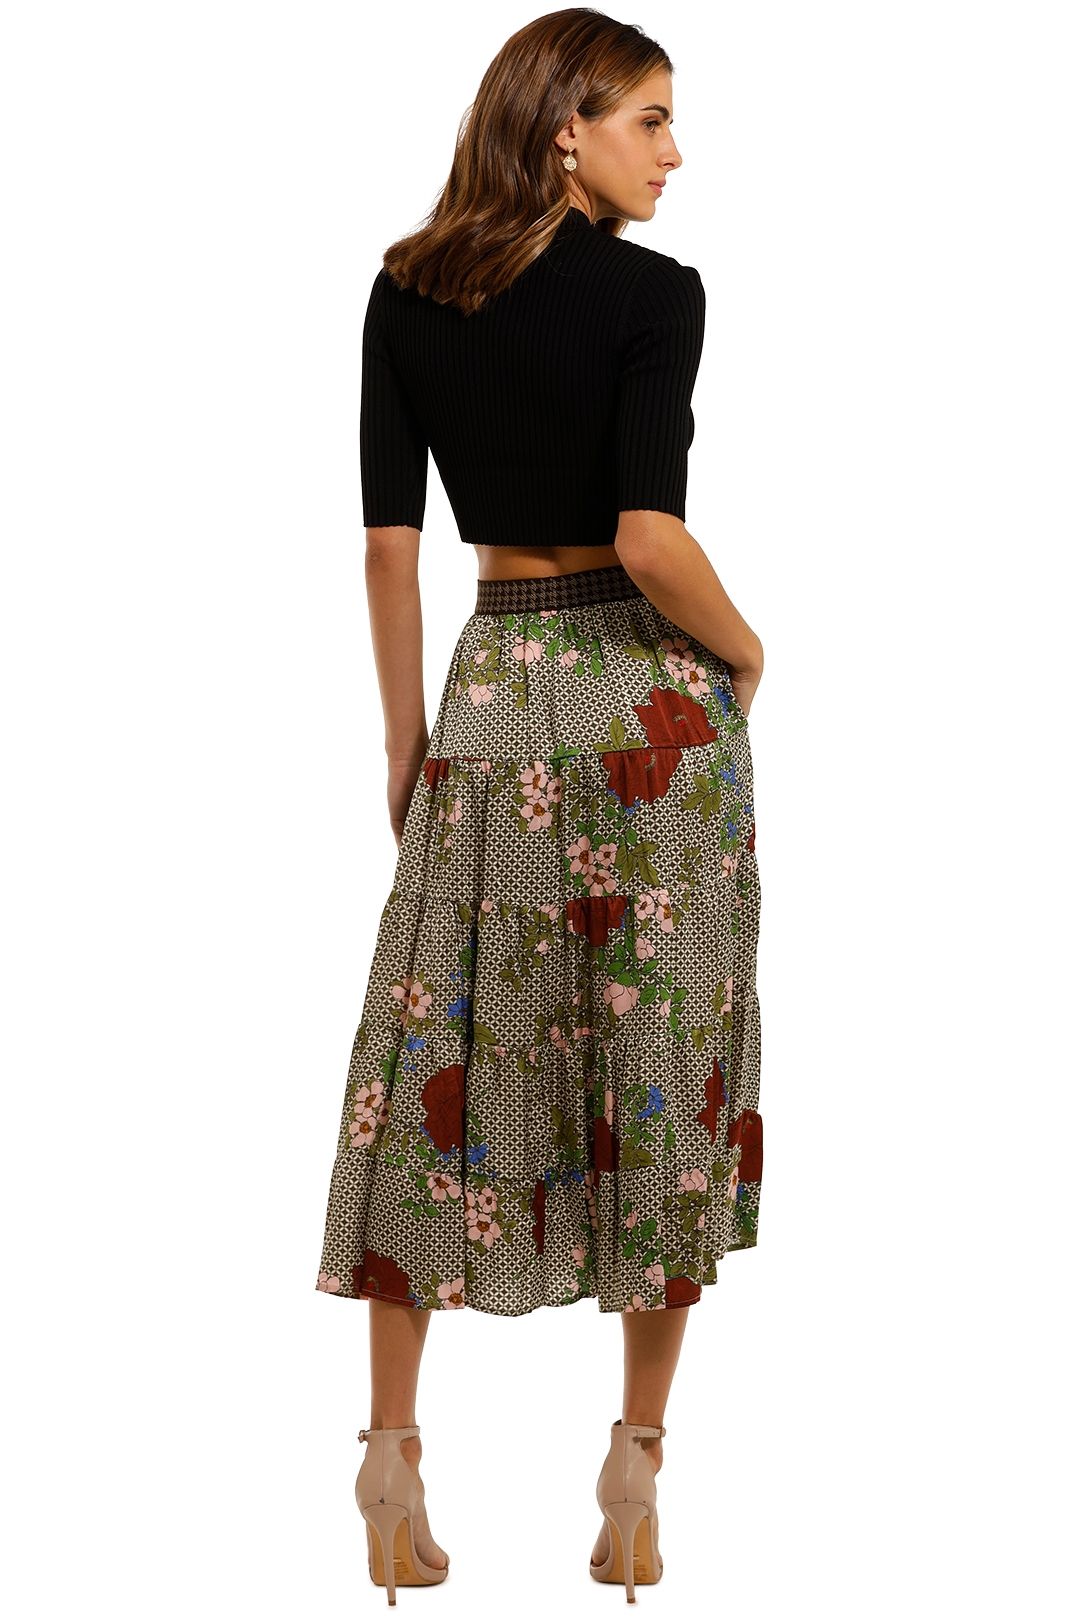 Hire The Last Layer Skirt in Floral | Curate By Trelise Cooper | GlamCorner